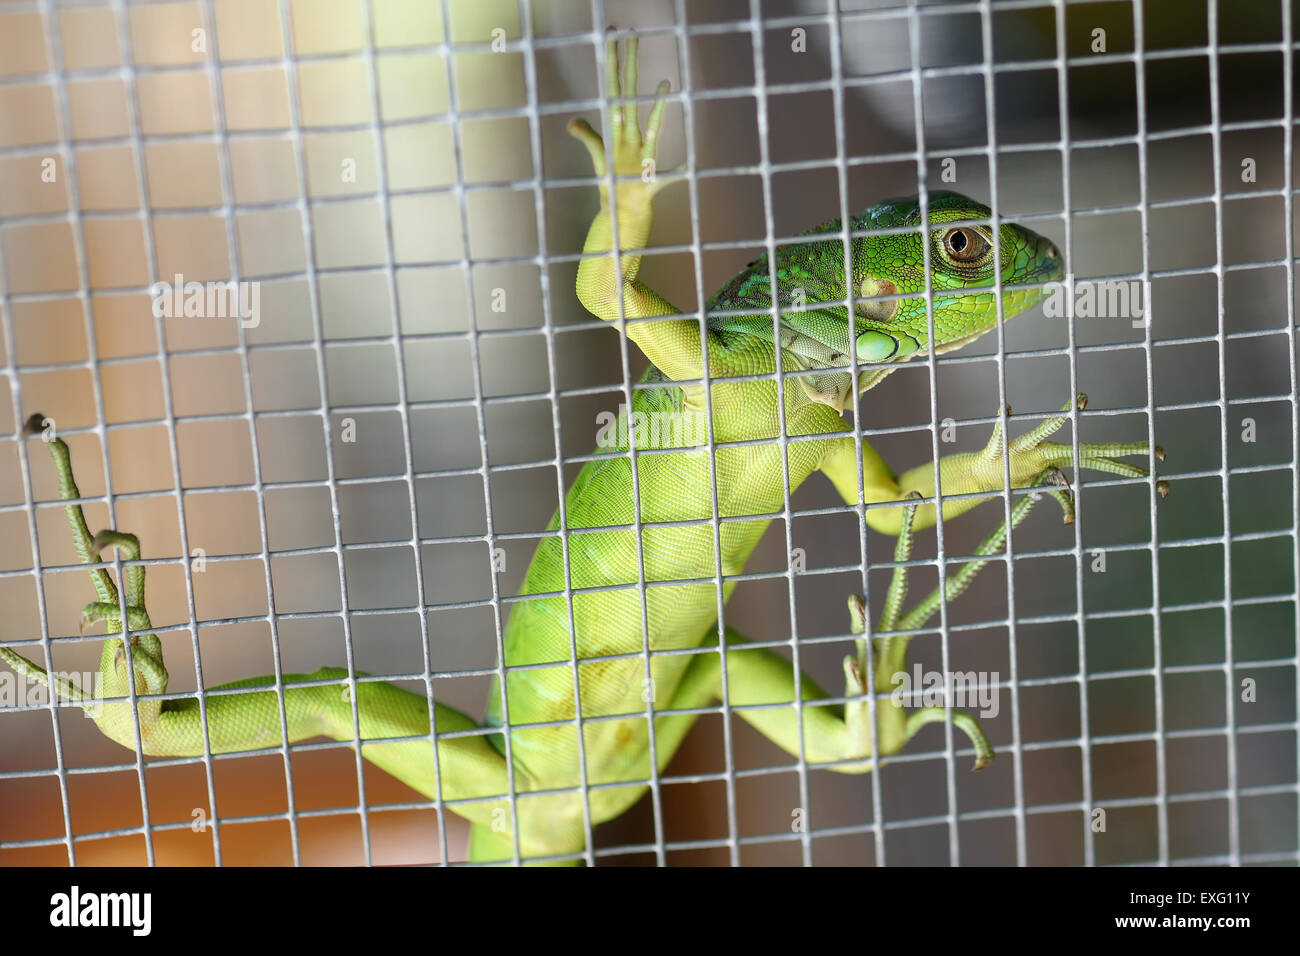 small iguana in the cage Stock Photo